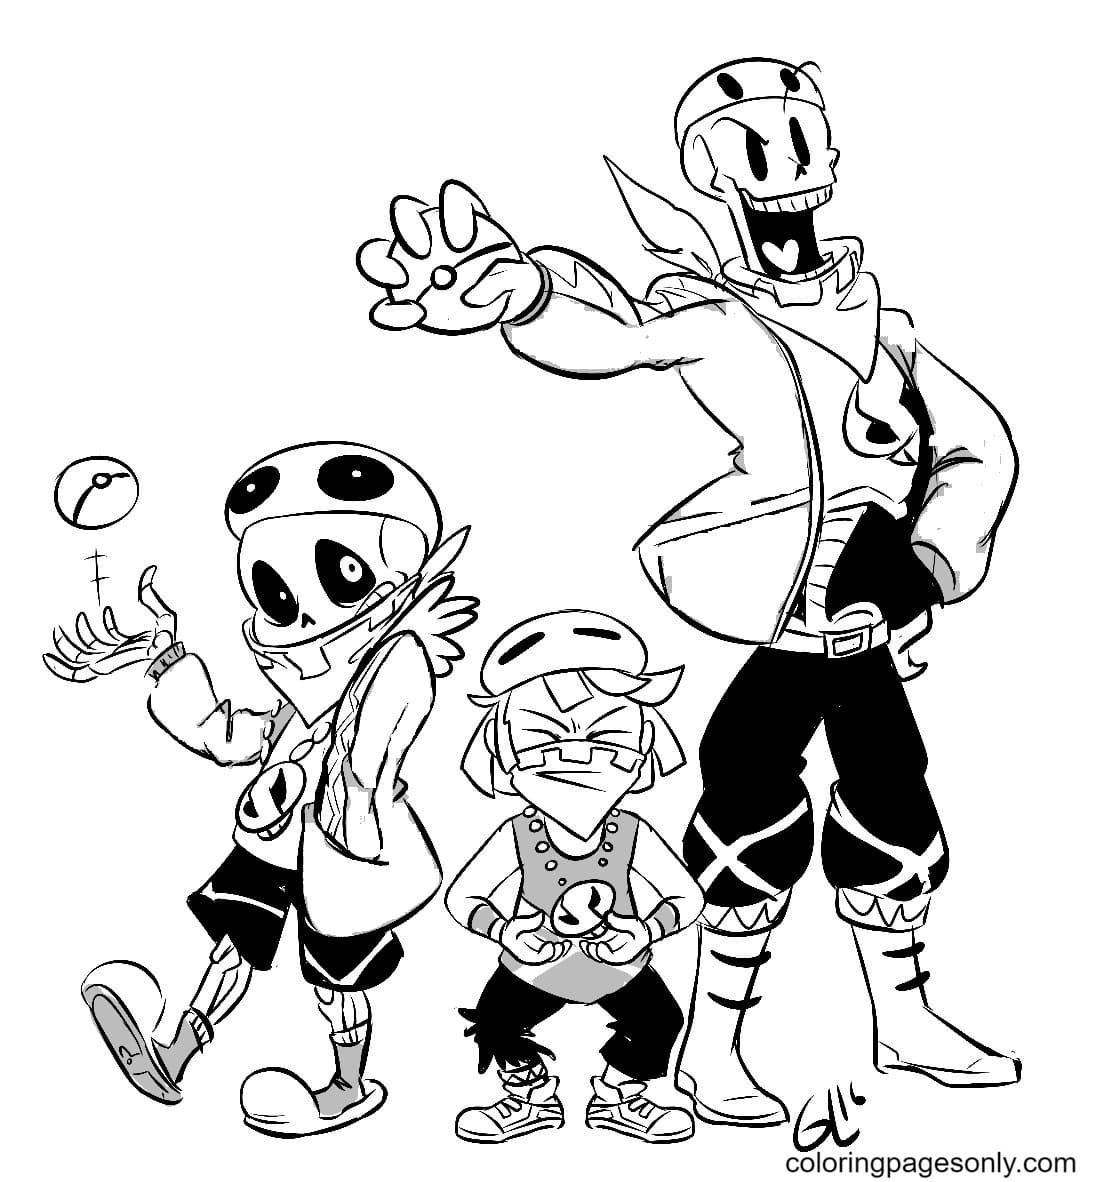 The Original Team Skull Coloring Pages